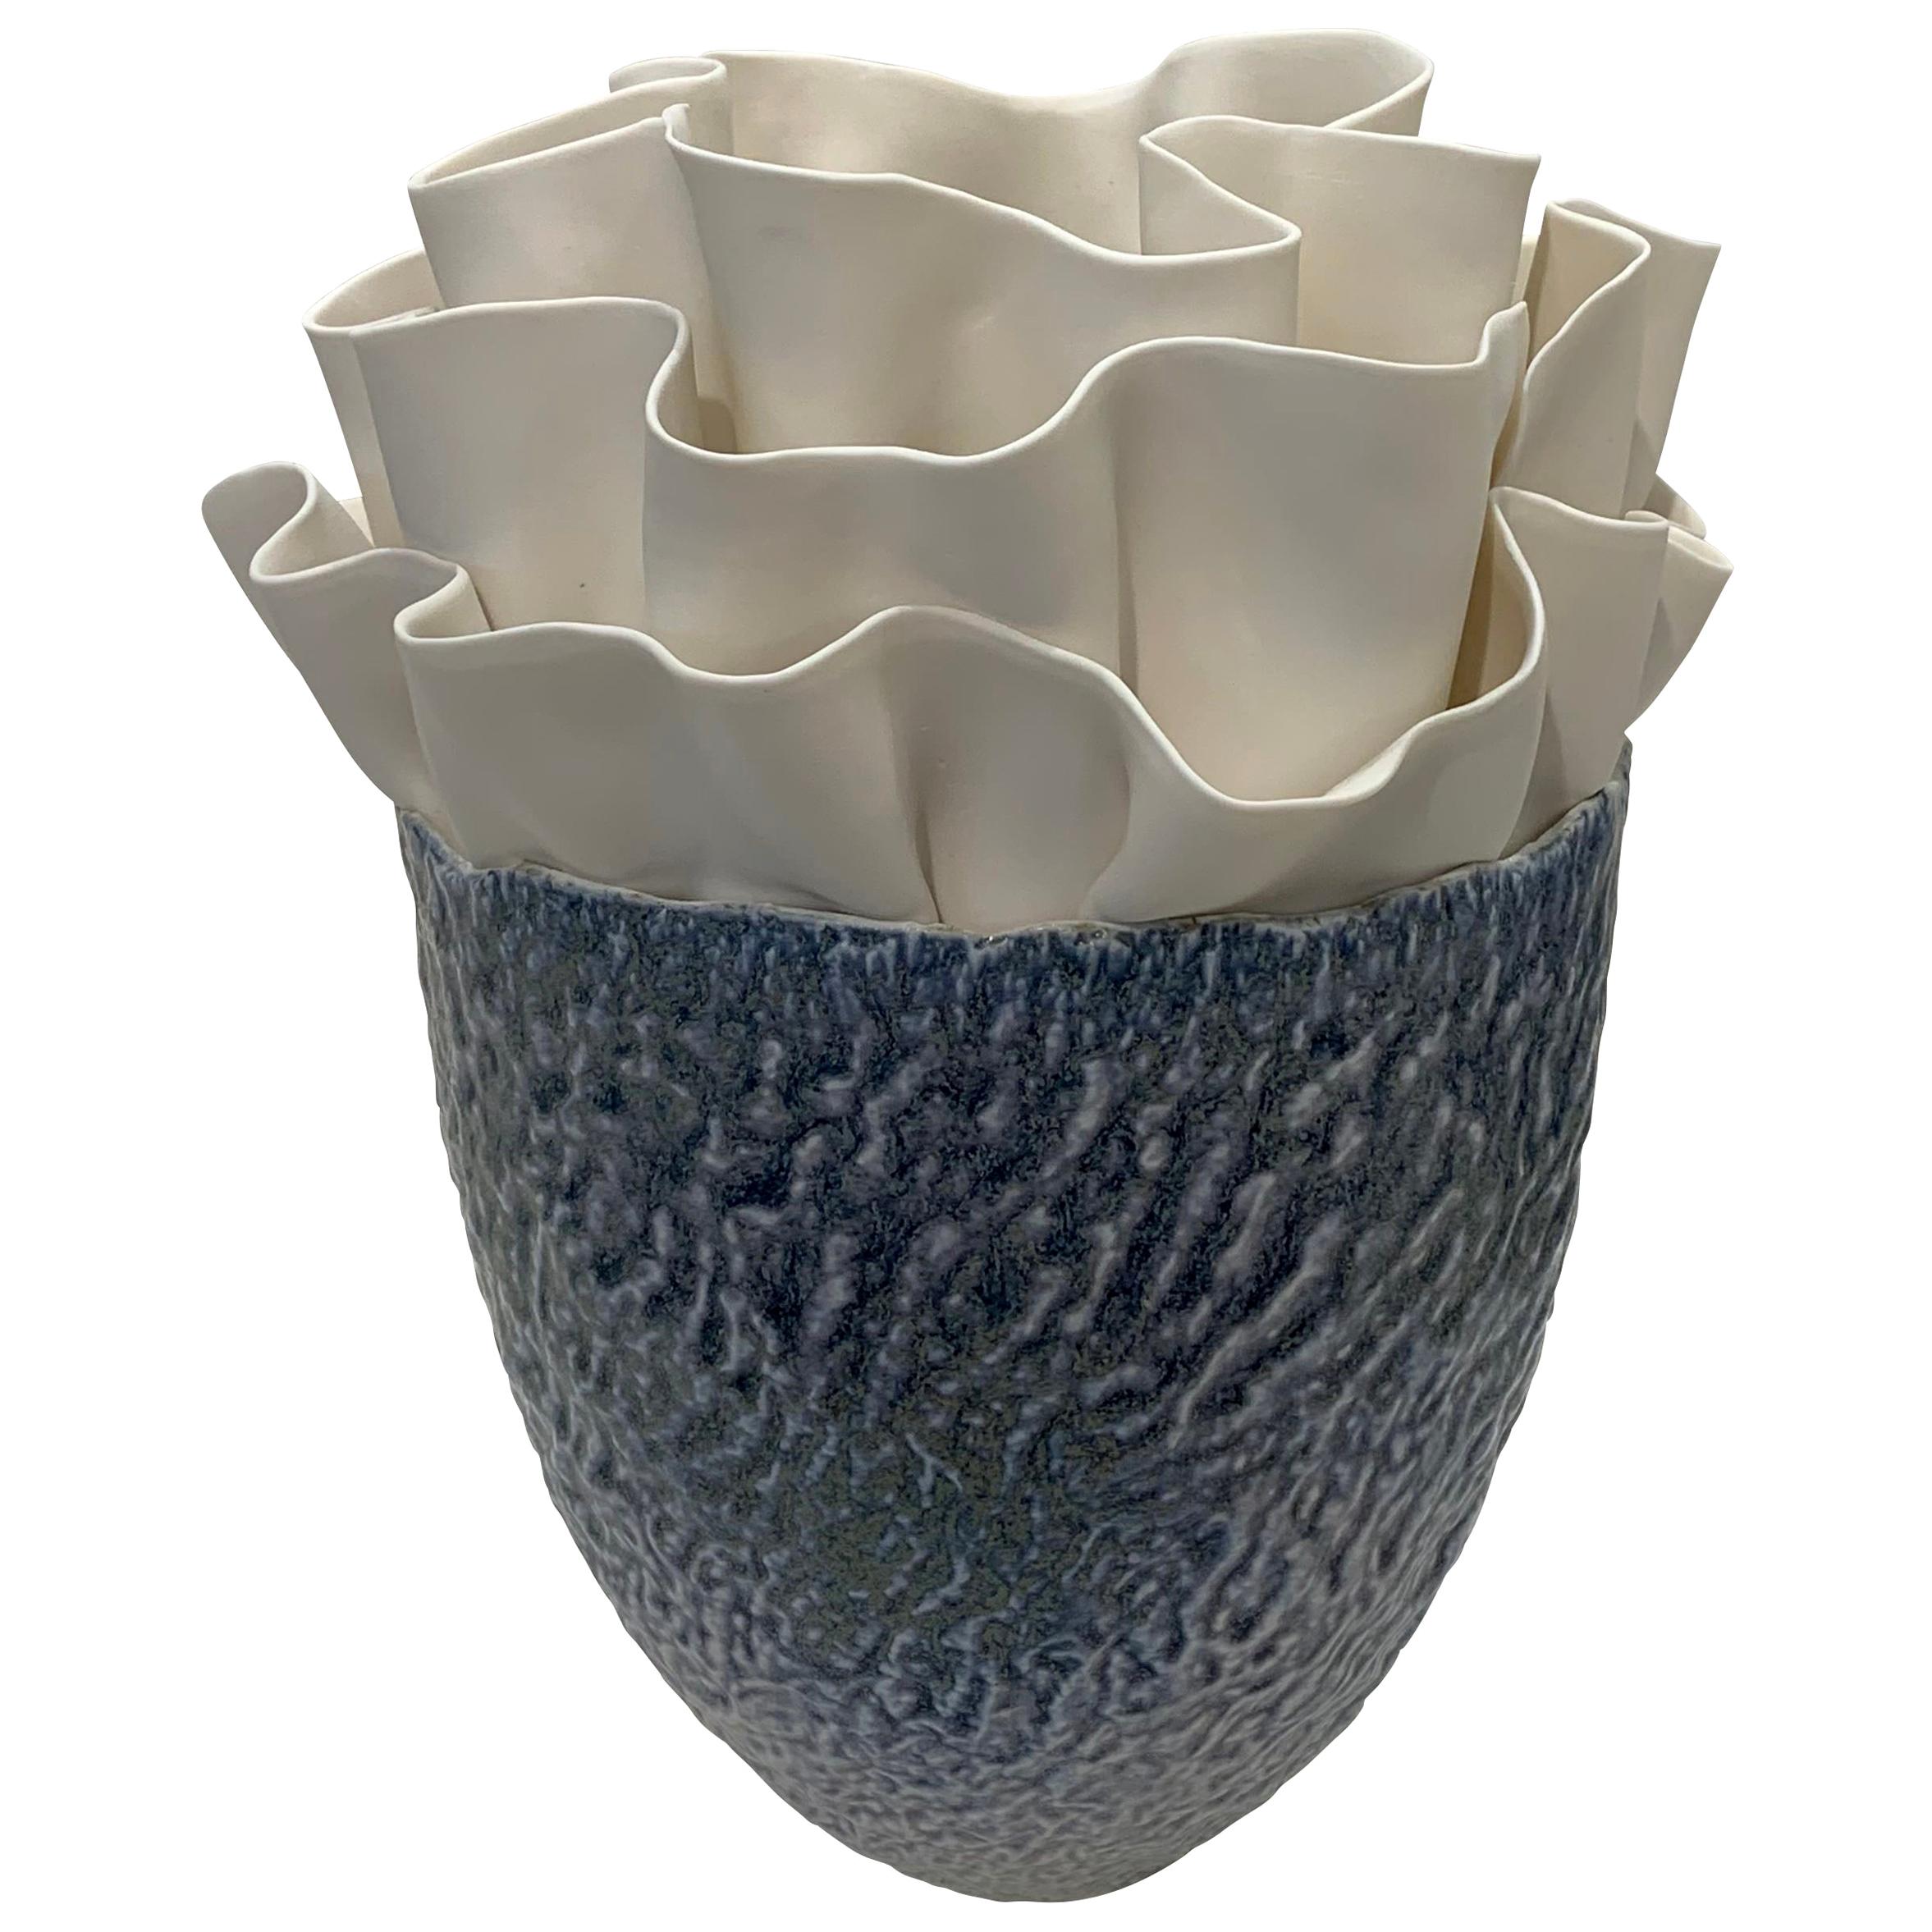 Blue and White Porcelain Floral Design Sculpture, Italy, Contemporary